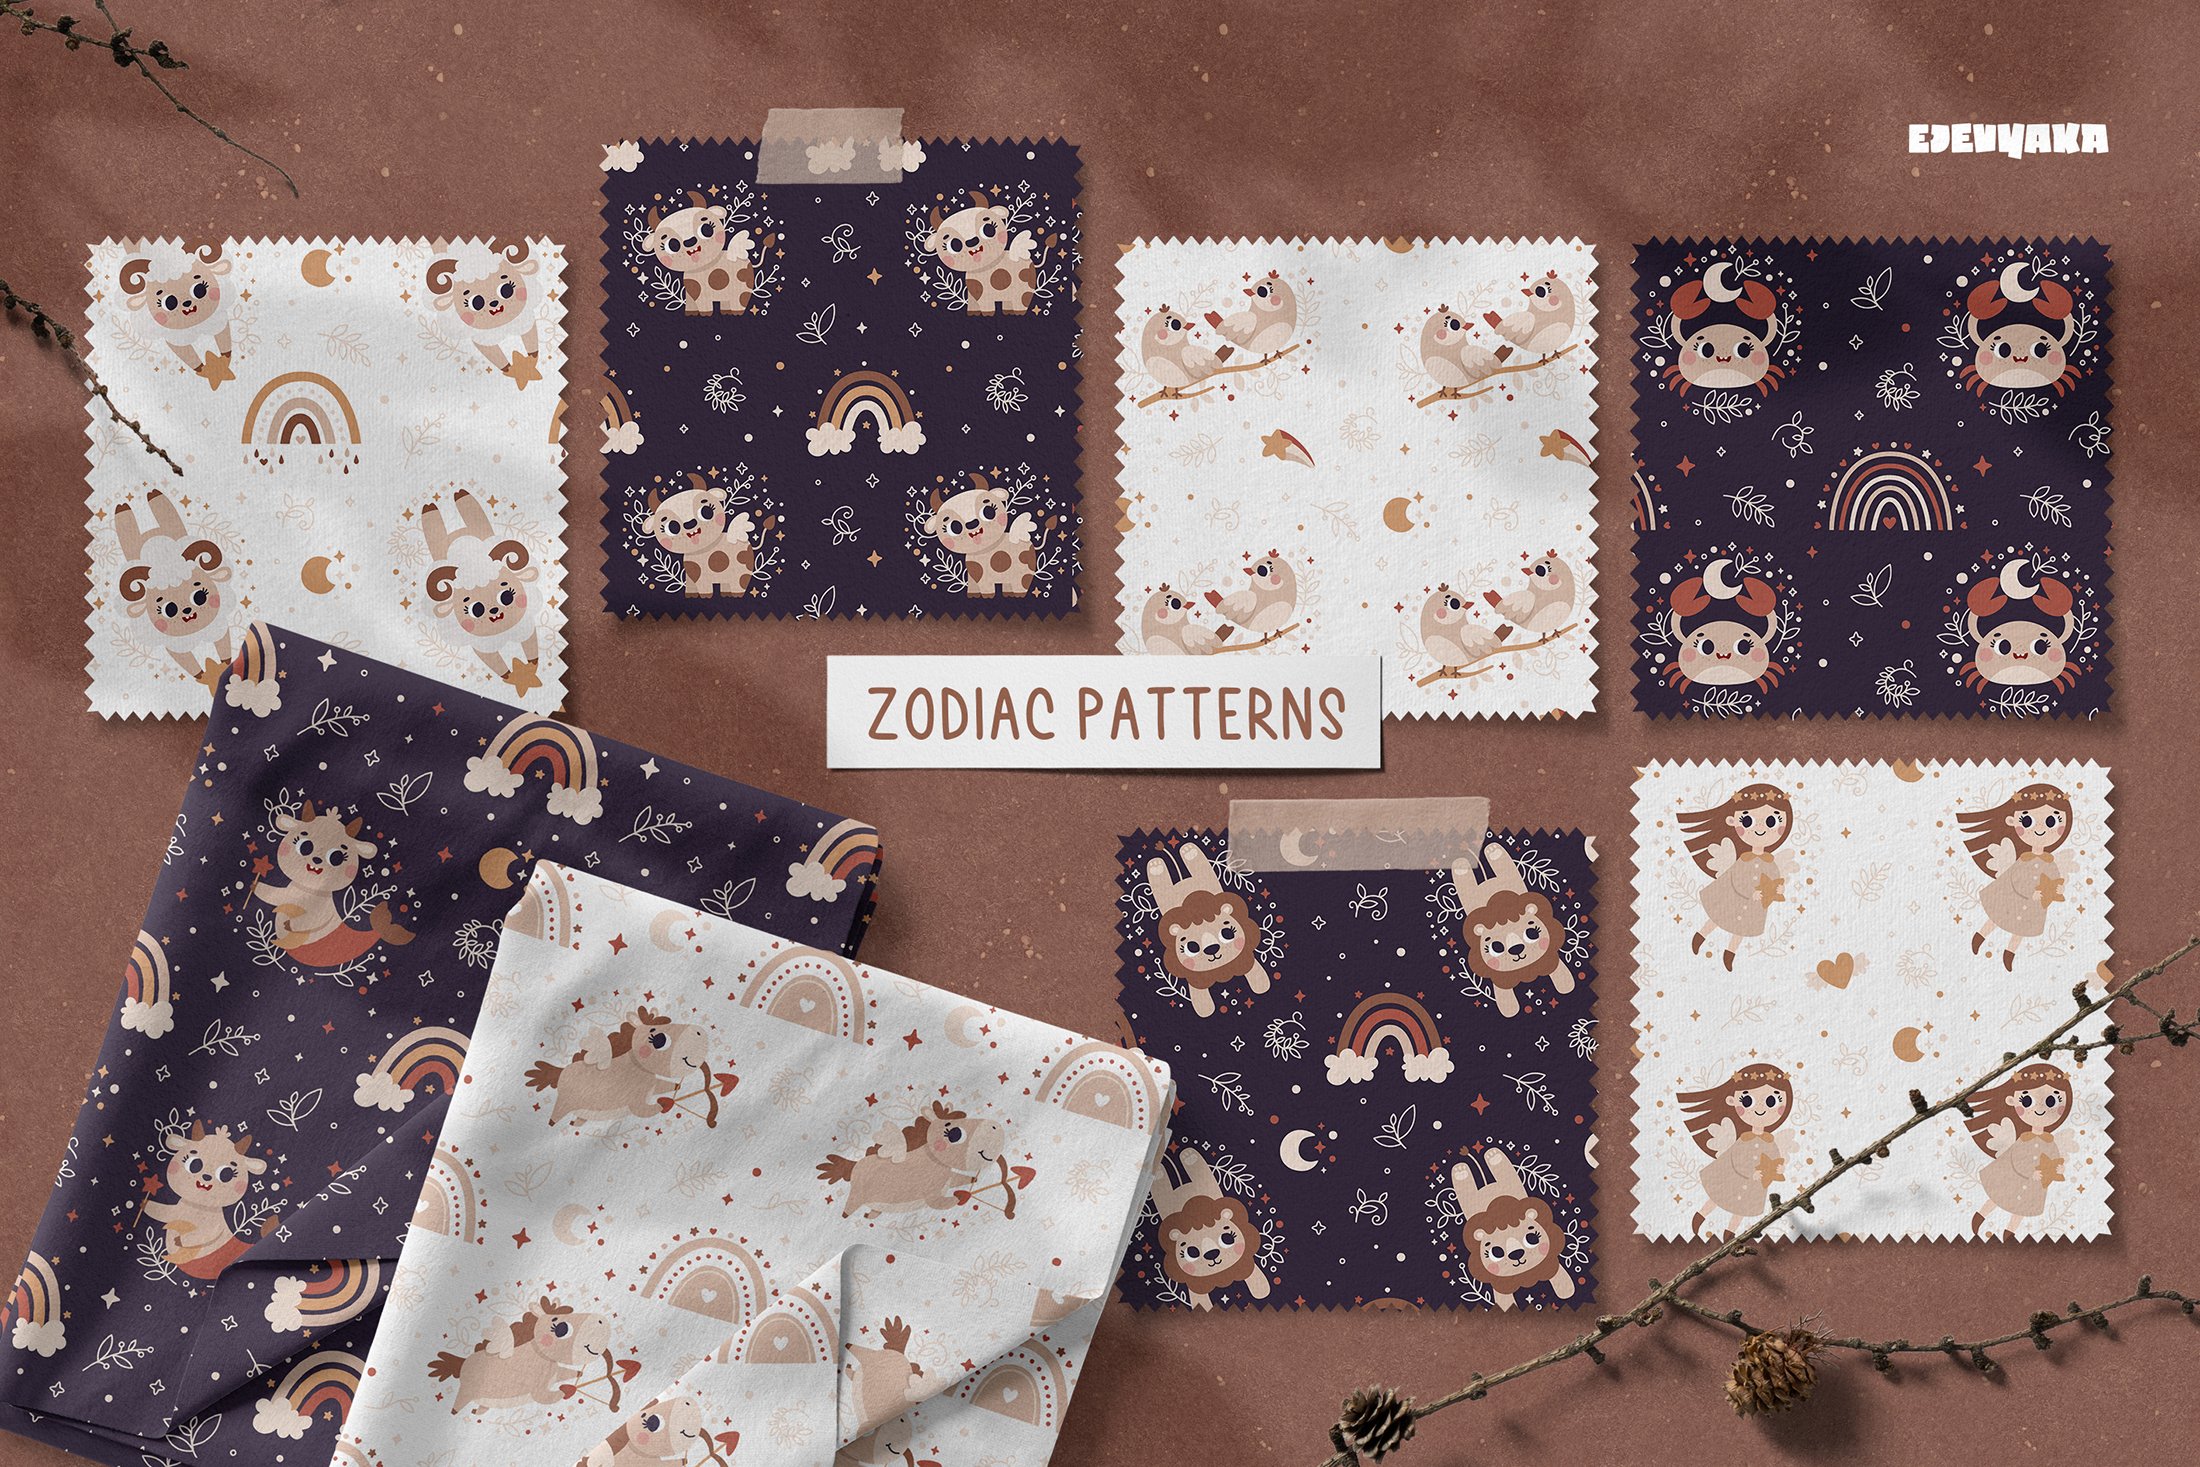 Cute zodiacs patterns for you.